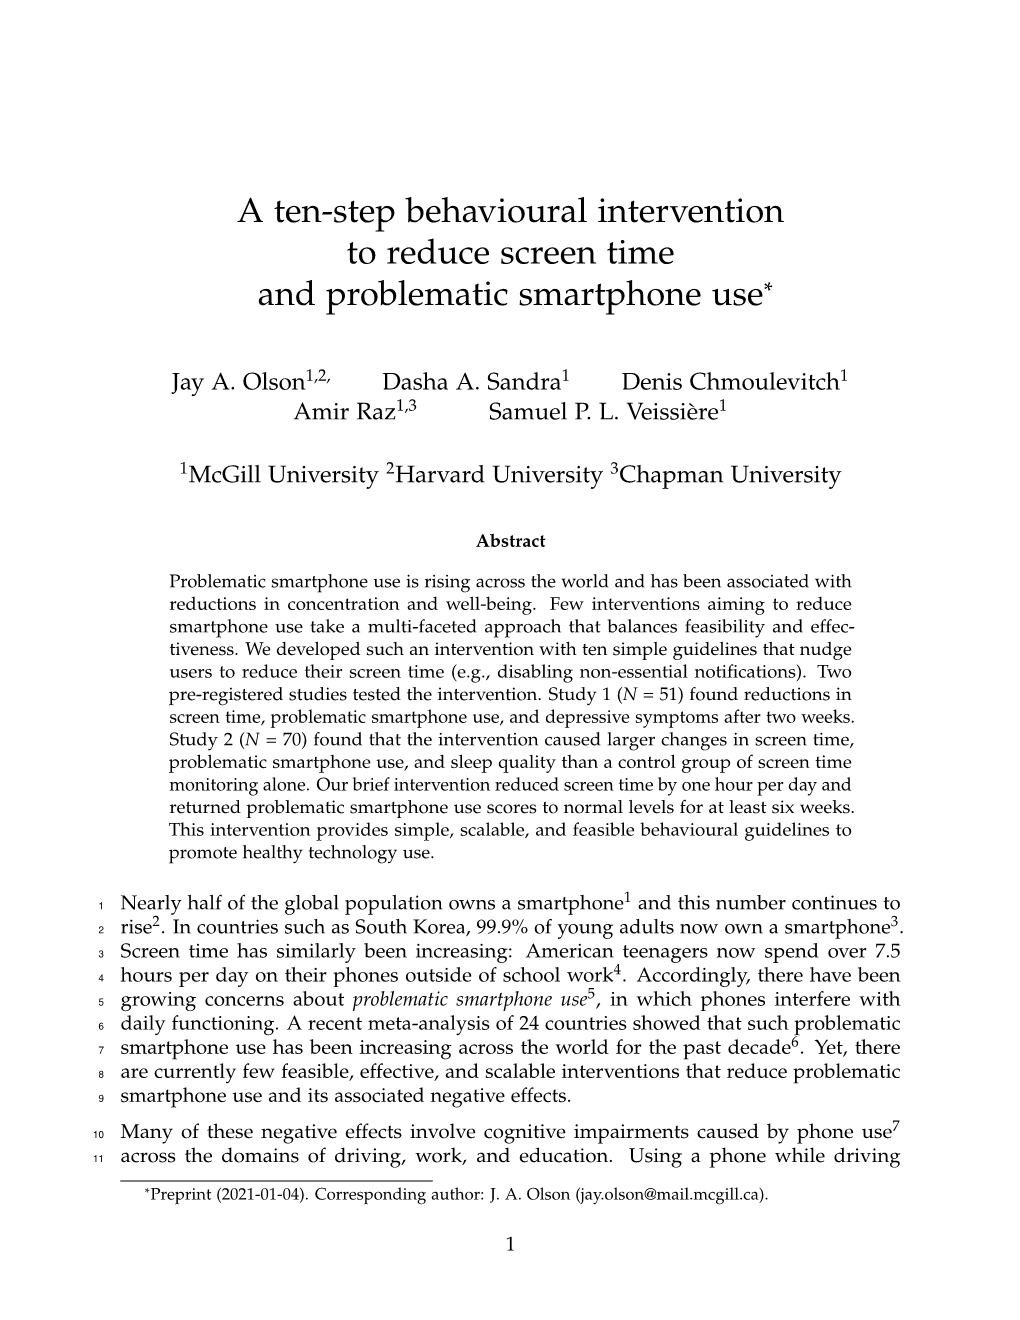 A Ten-Step Behavioural Intervention to Reduce Screen Time and Problematic Smartphone Use*